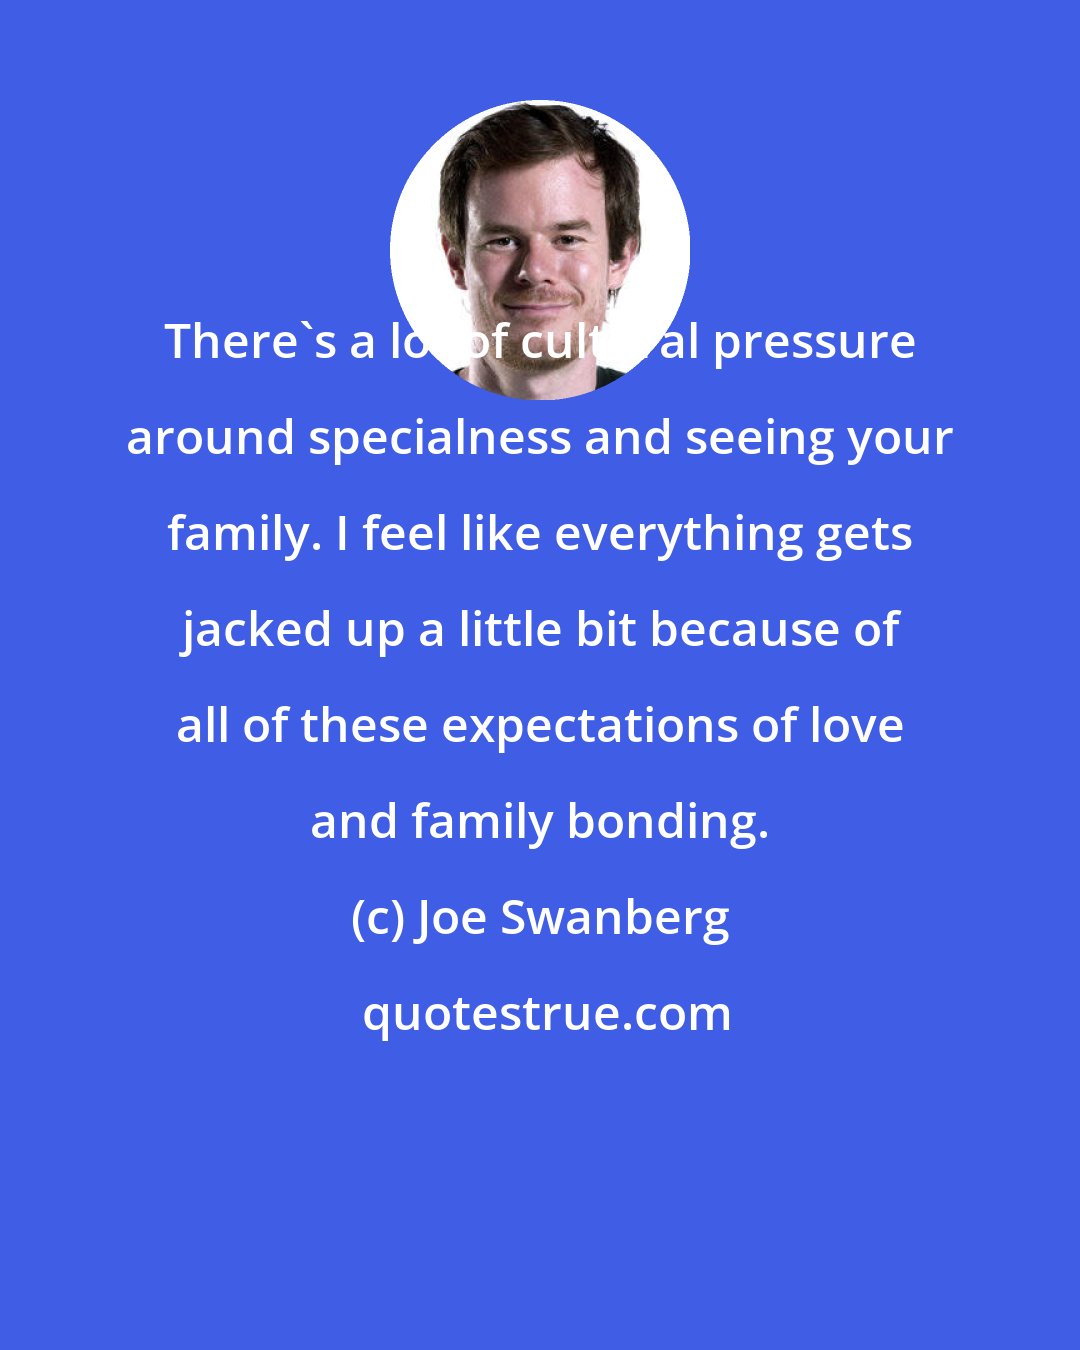 Joe Swanberg: There's a lot of cultural pressure around specialness and seeing your family. I feel like everything gets jacked up a little bit because of all of these expectations of love and family bonding.